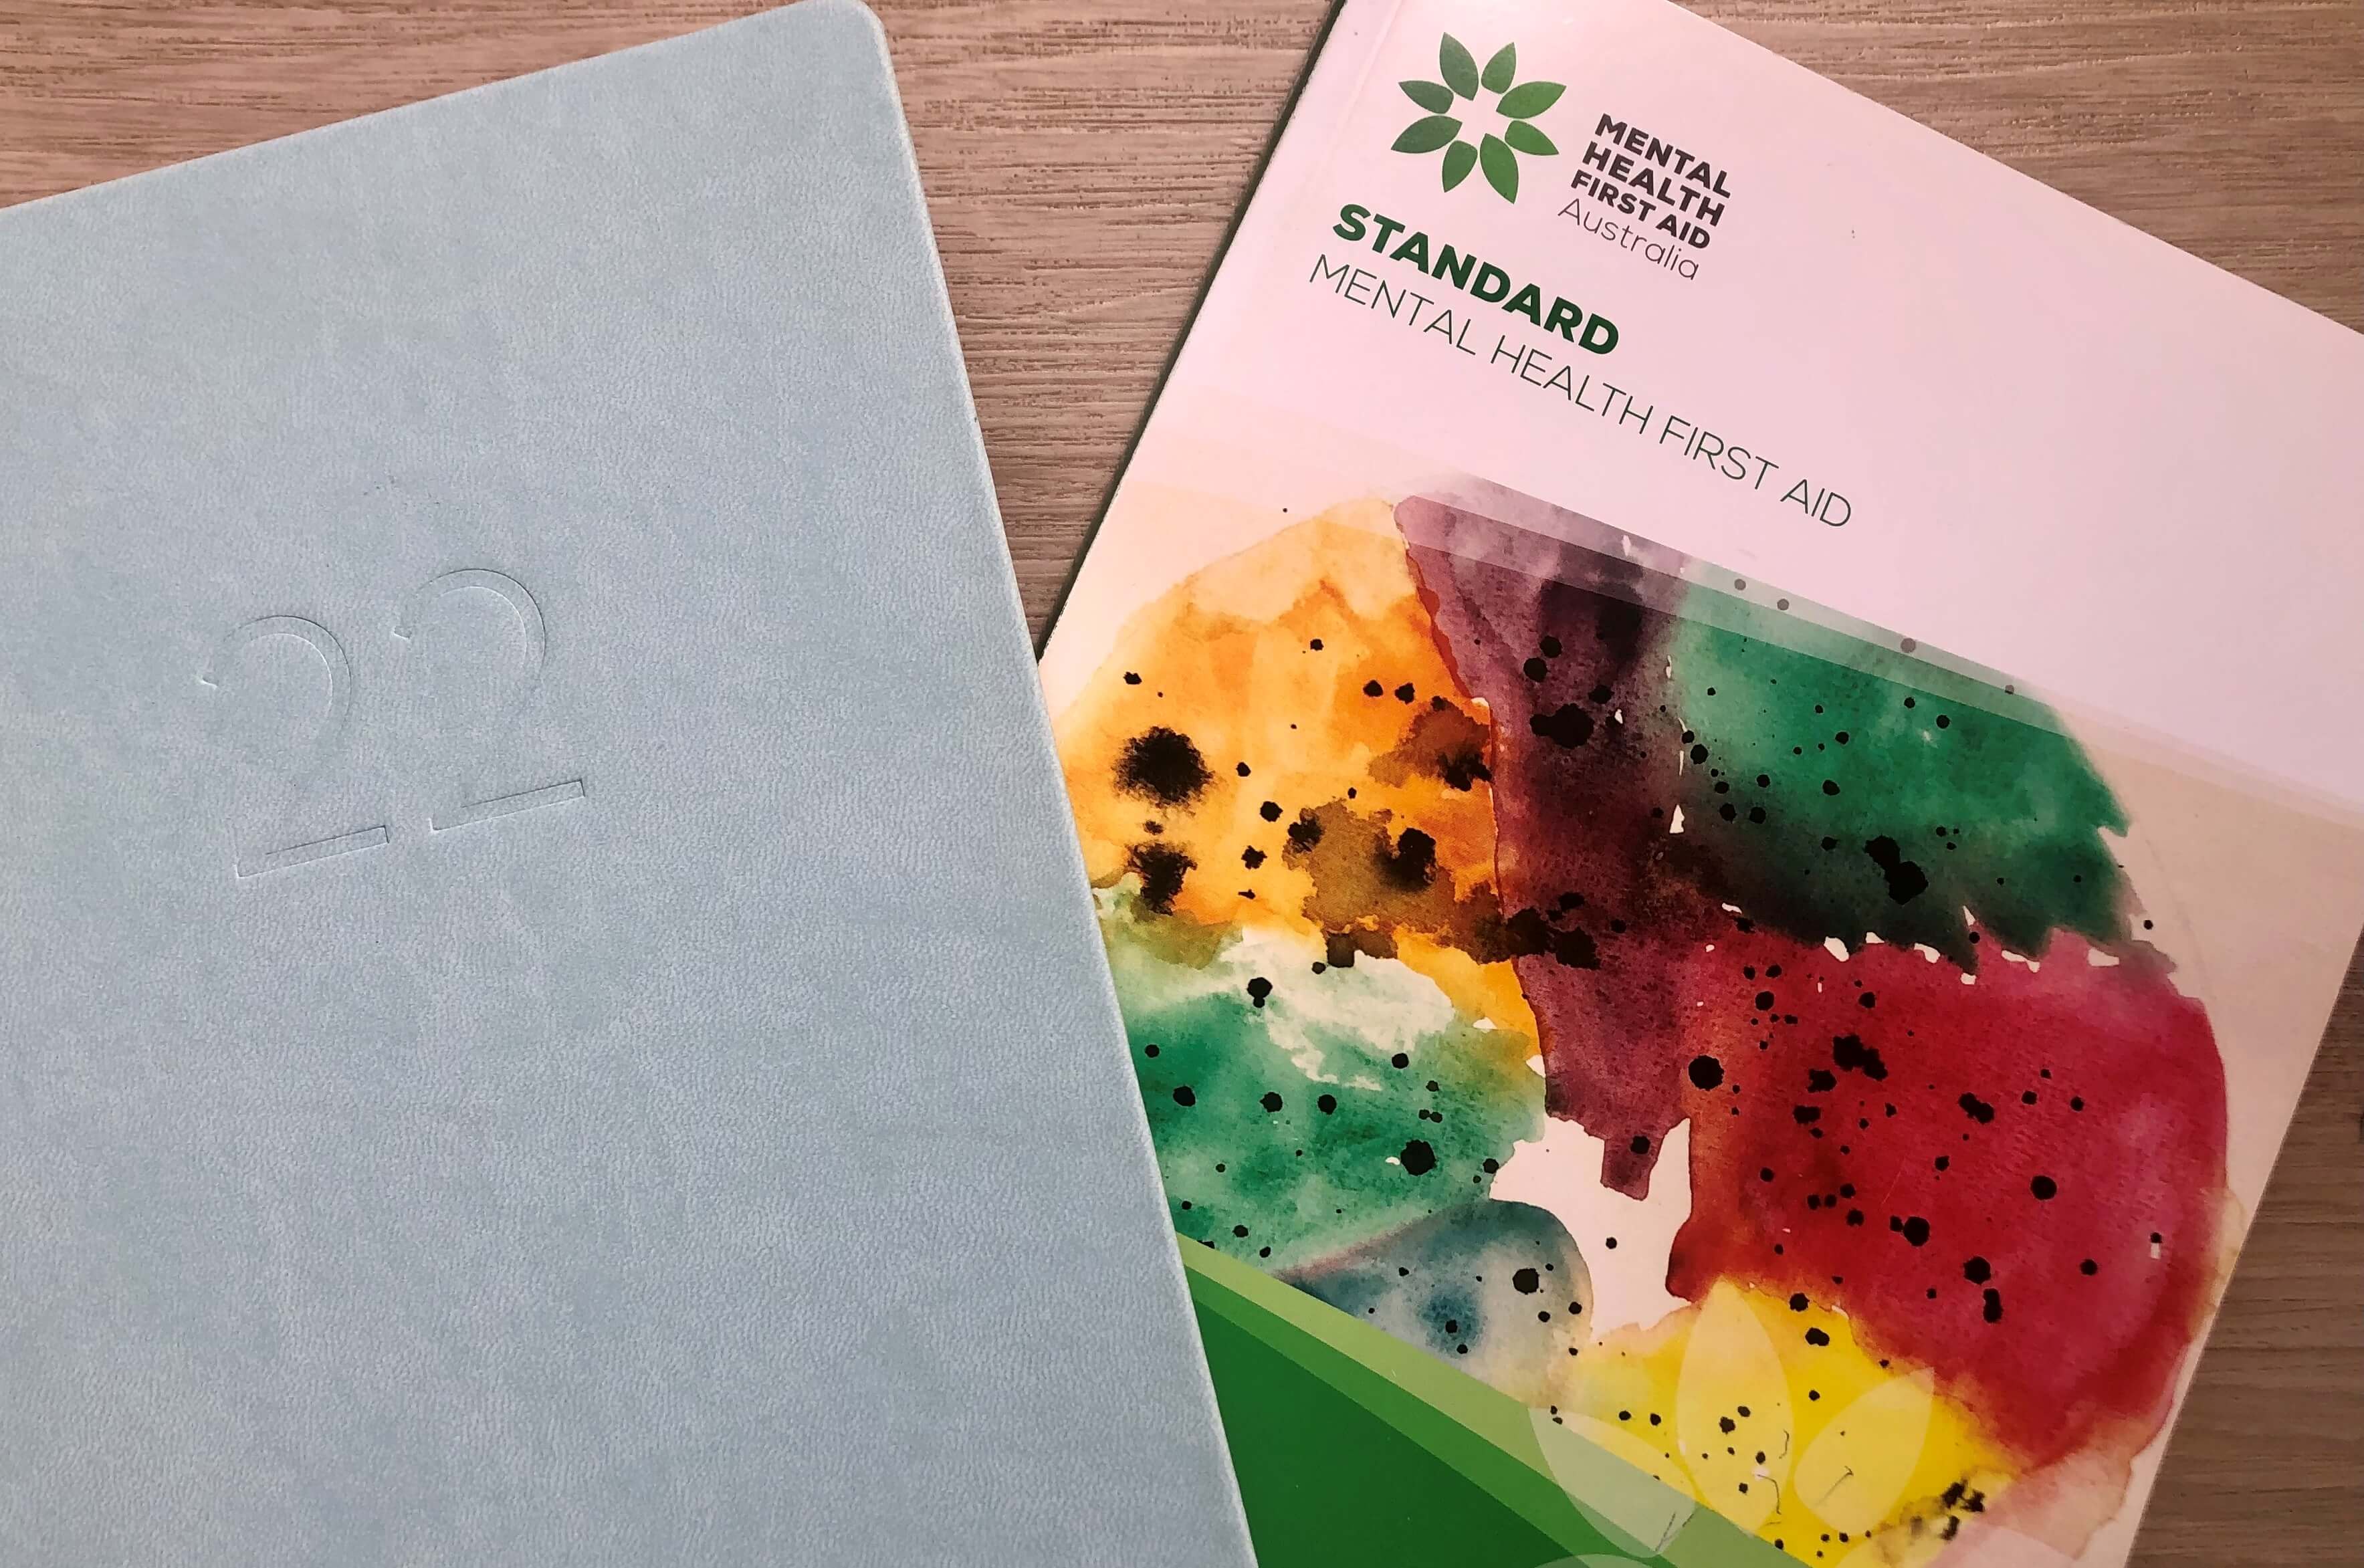 A light blue 2022 diary and the Standard Mental Health First Aid course book, sitting on a light oak table. 